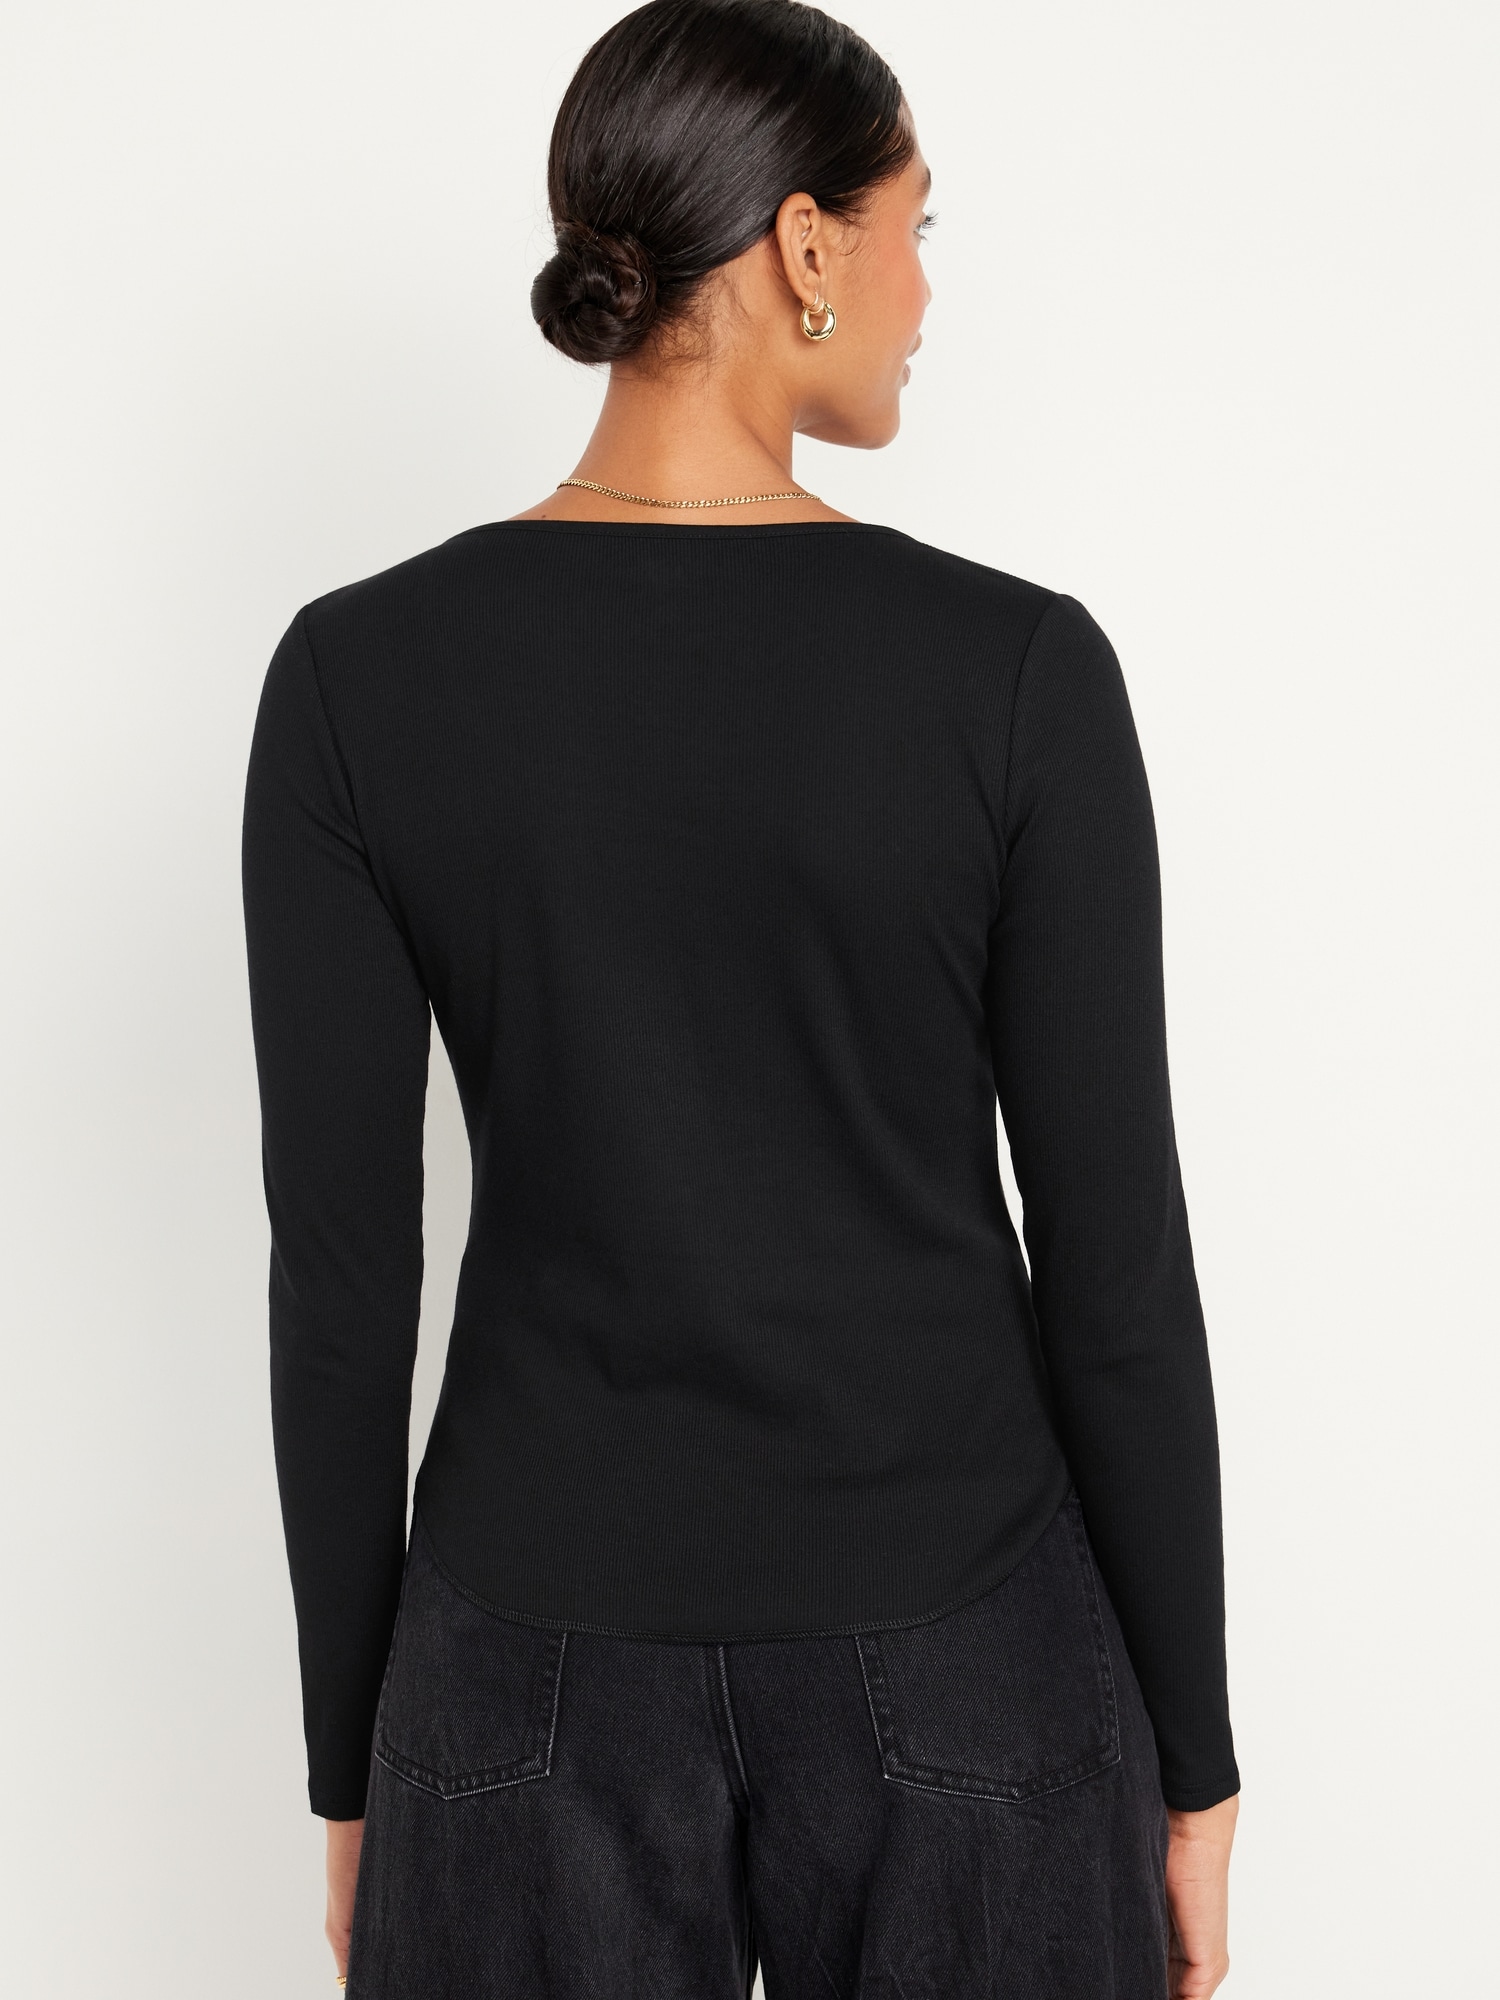 T-Shirt Women Fitted | Navy for Old Rib-Knit Long-Sleeve